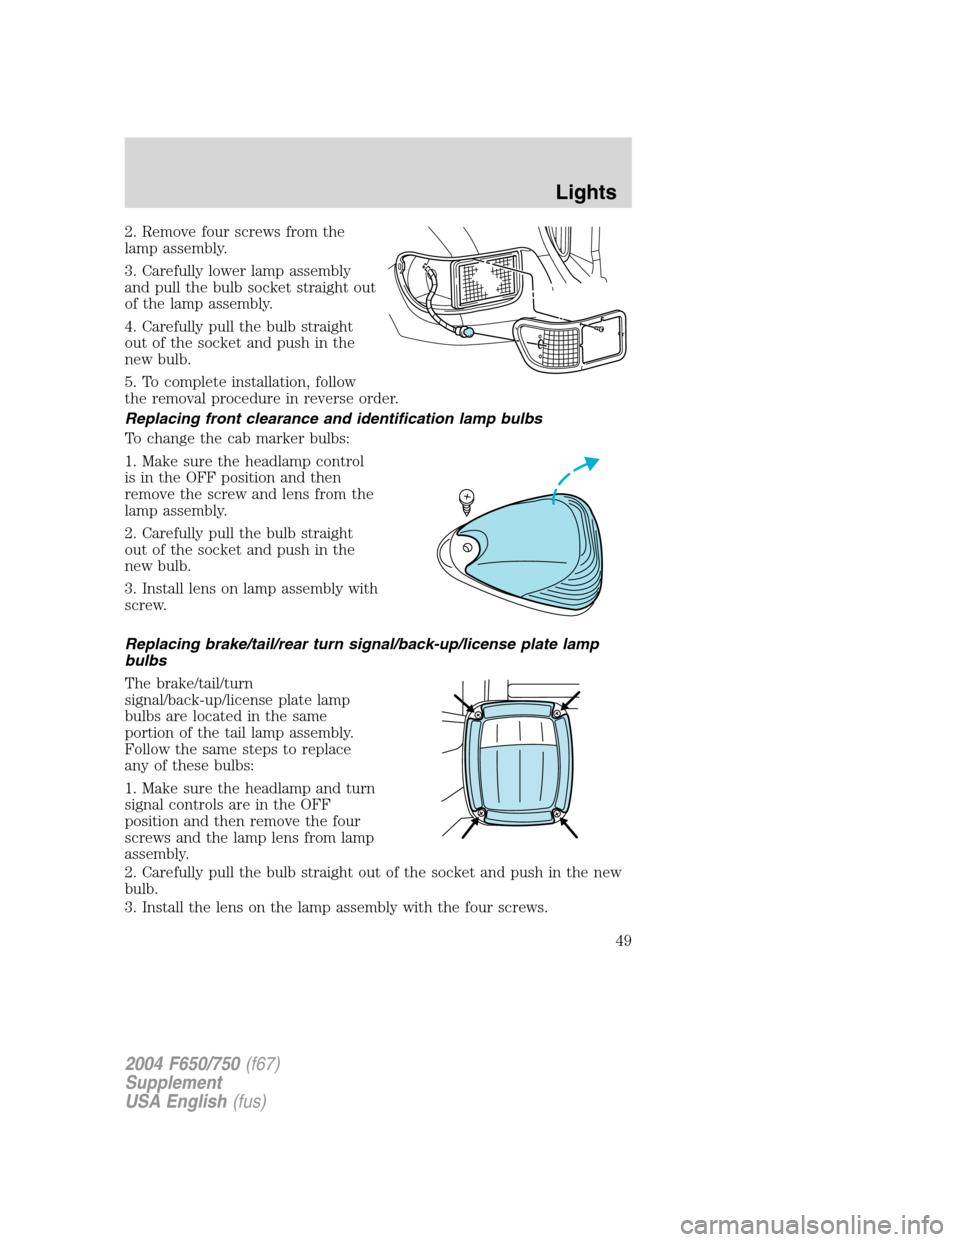 FORD F750 2004 11.G Owners Manual 2. Remove four screws from the
lamp assembly.
3. Carefully lower lamp assembly
and pull the bulb socket straight out
of the lamp assembly.
4. Carefully pull the bulb straight
out of the socket and pus